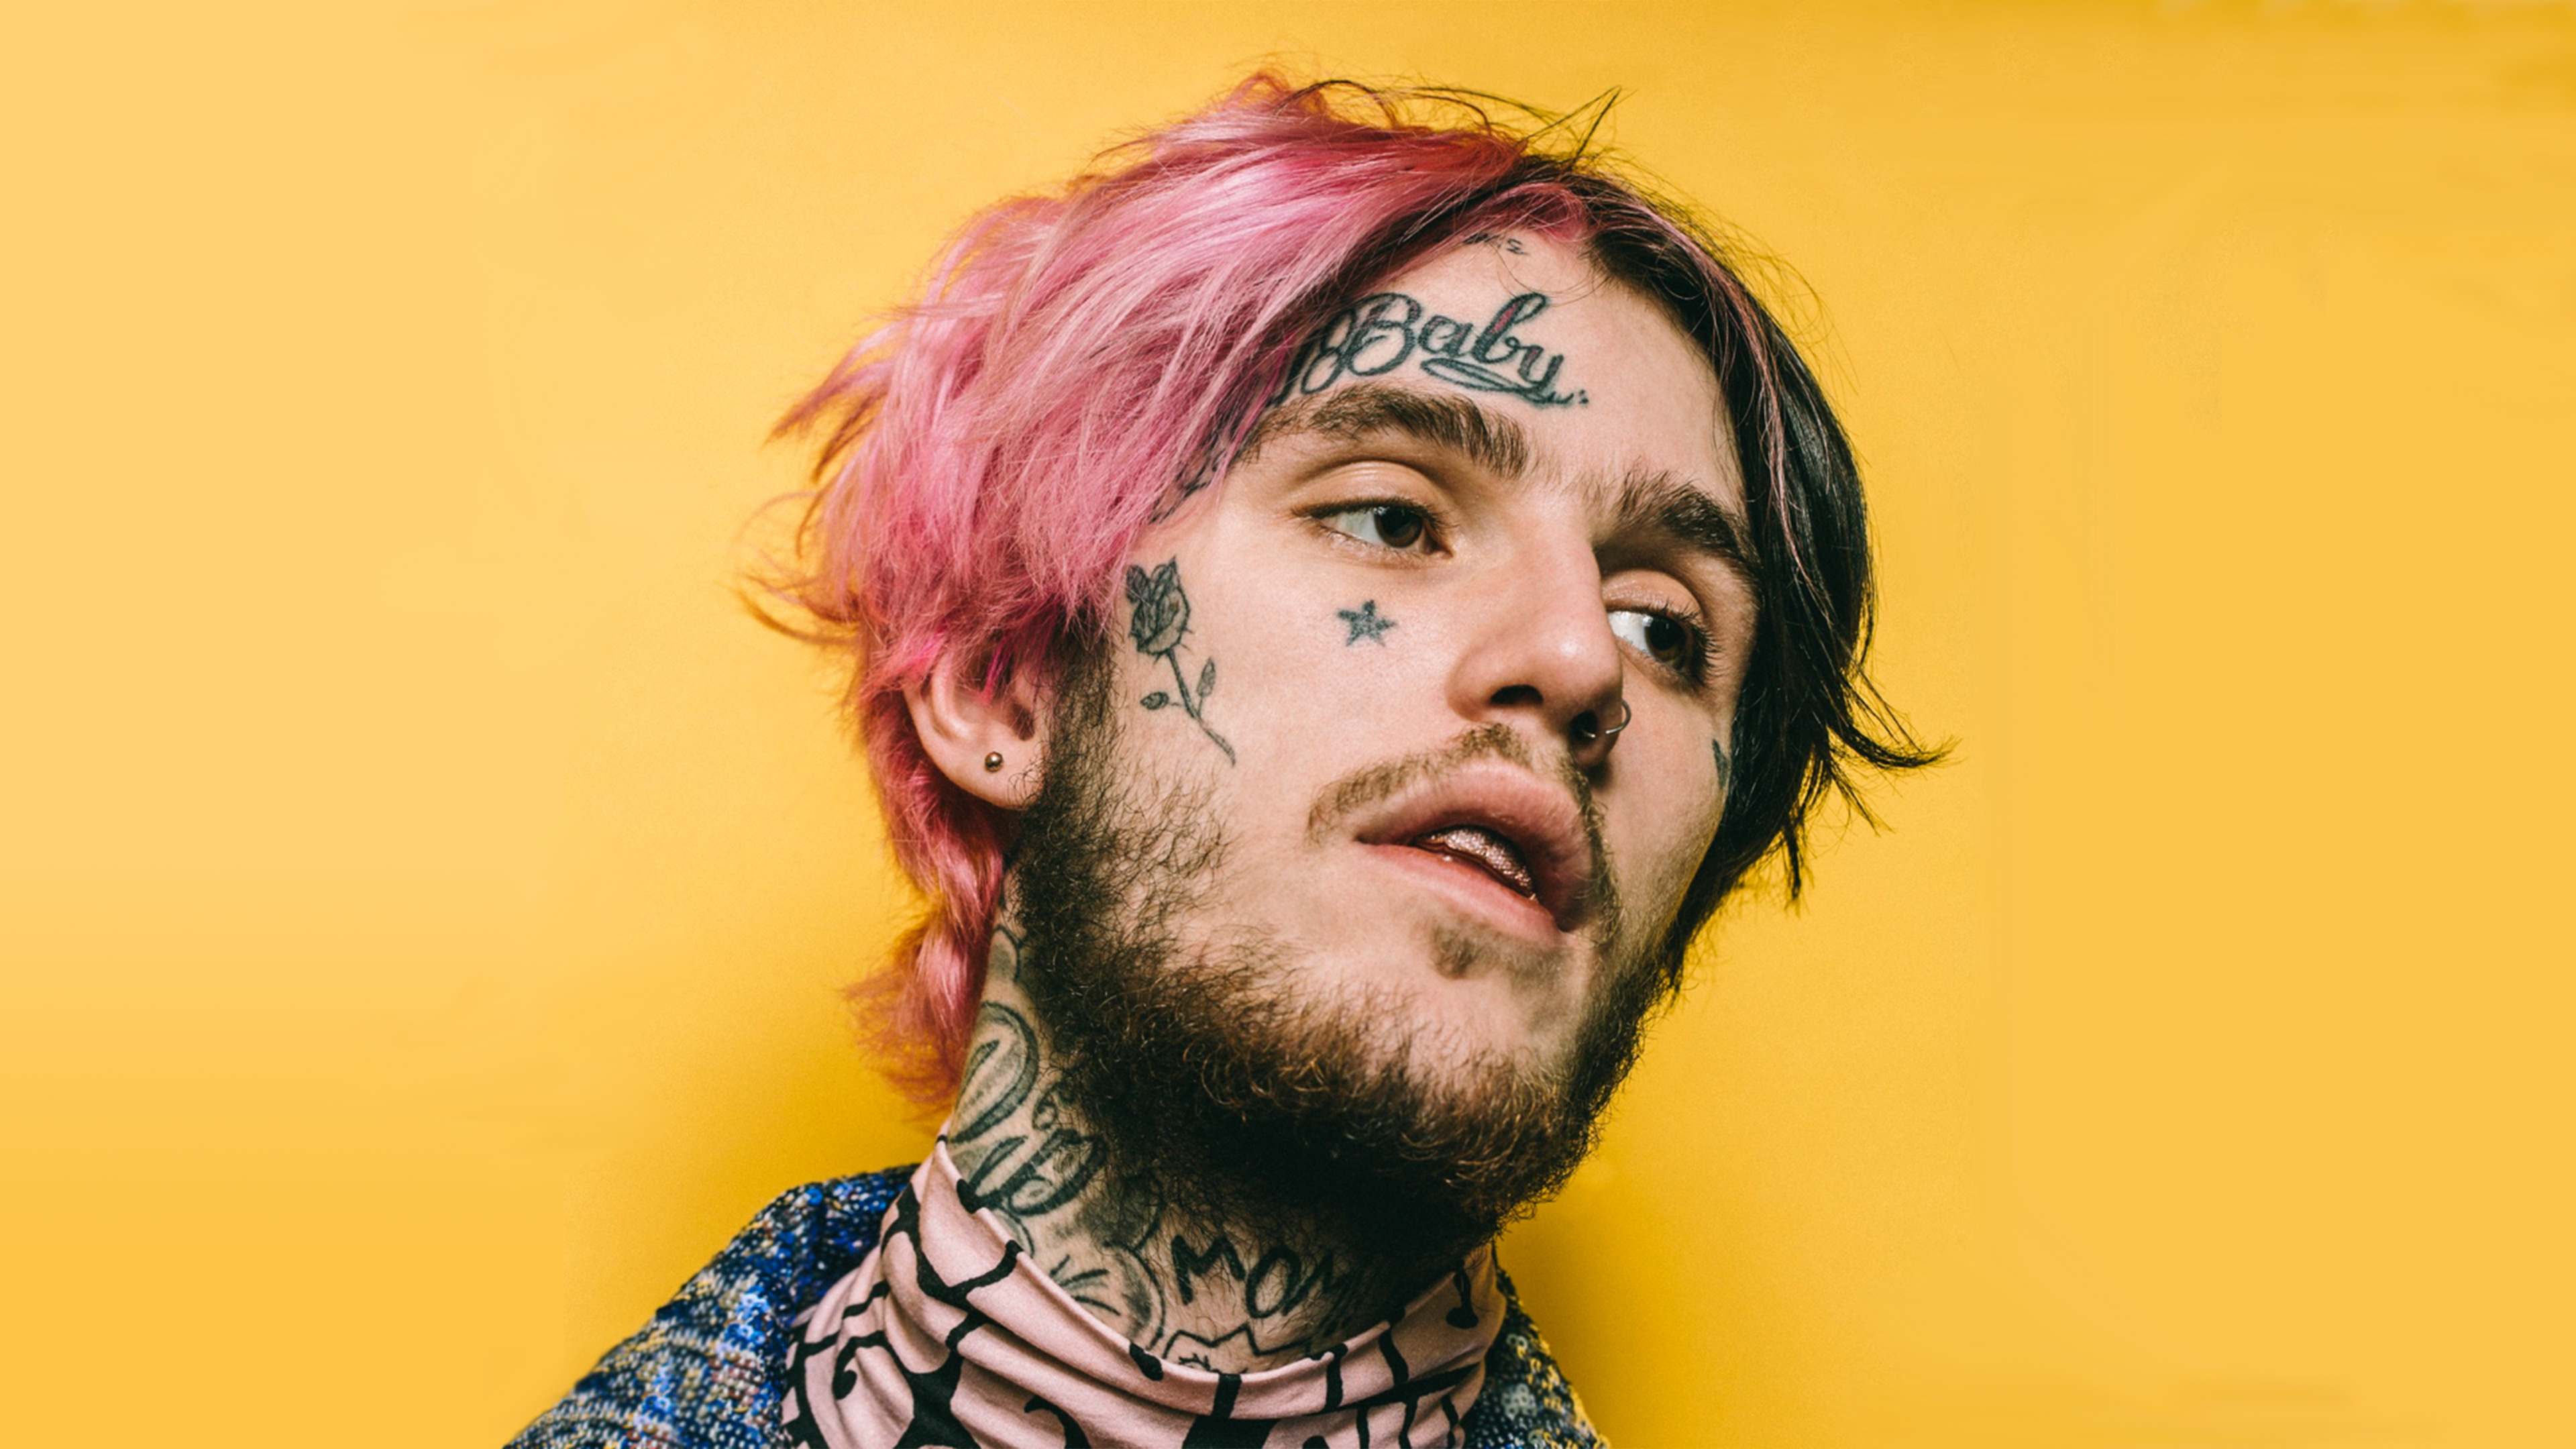 Lil Peep's iconic blue hair - wide 3